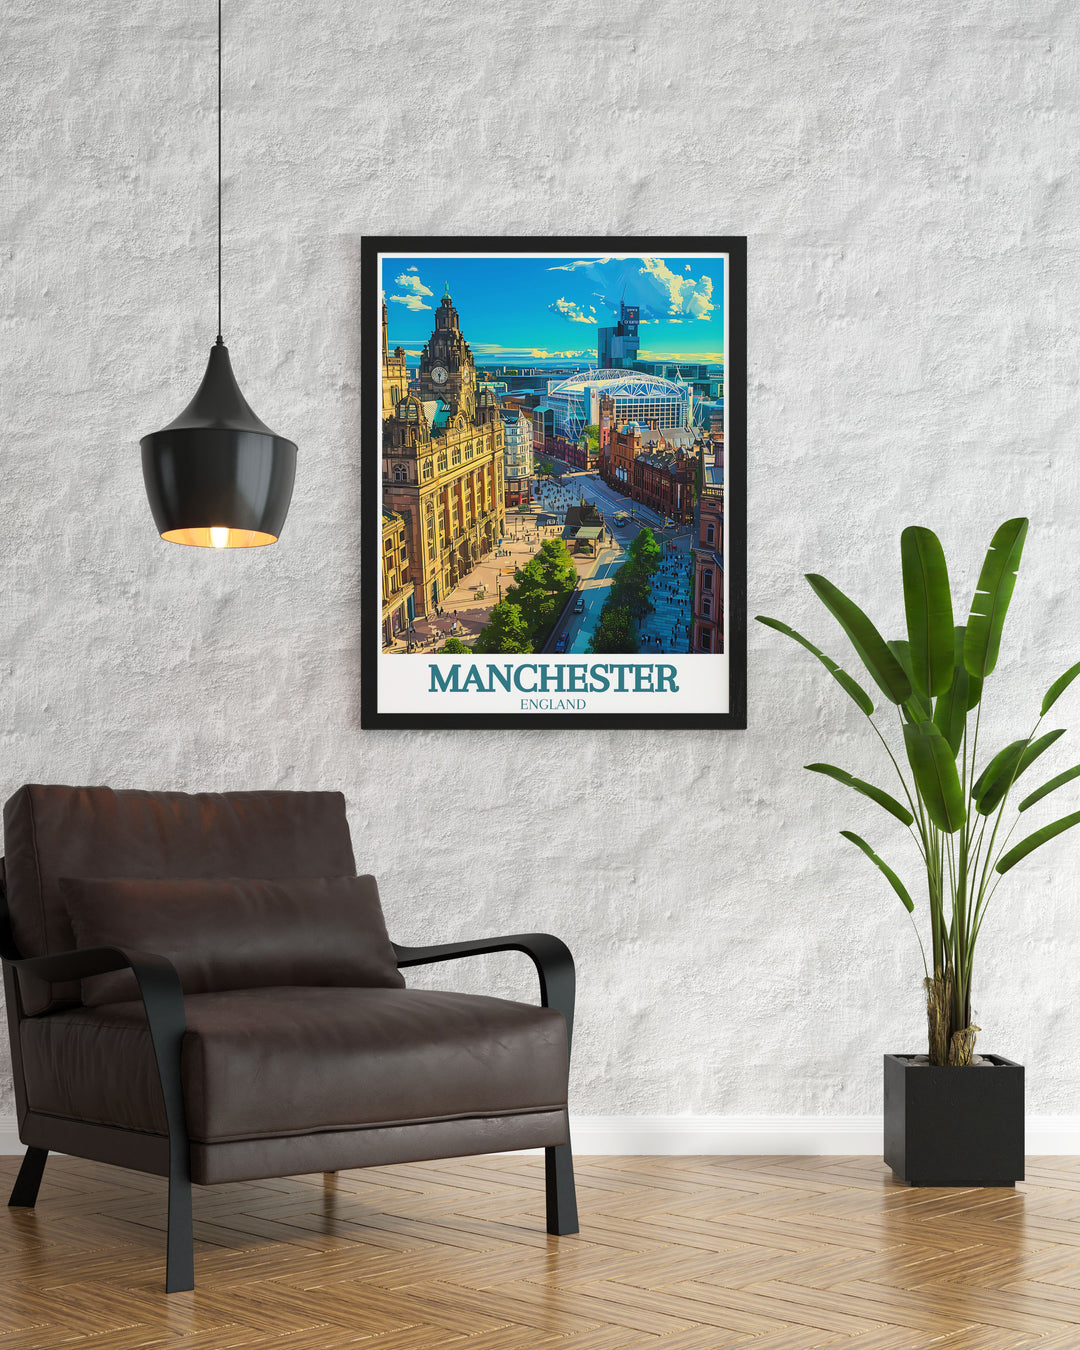 Vintage travel print of Manchester town hall and Old Trafford stadium capturing the essence of the citys charm and architectural splendor a must have for those who love Manchesters history and culture.